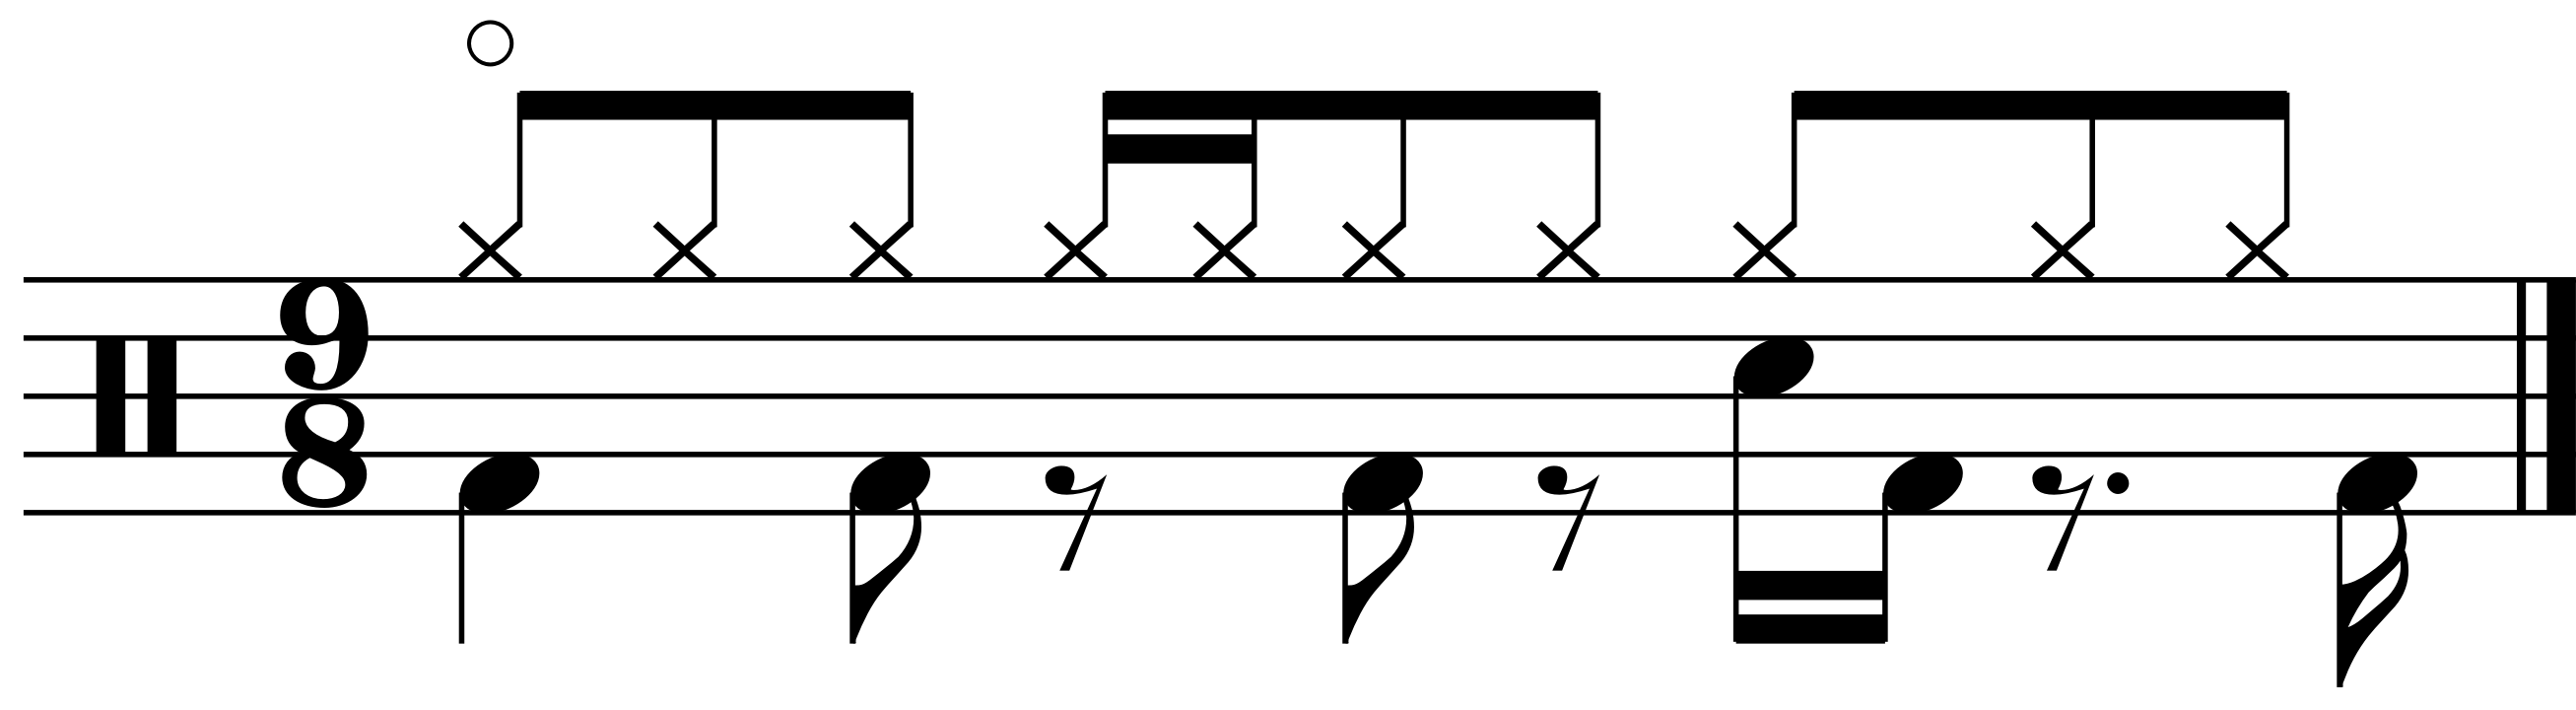 A 9/8 groove with a specific snare placement